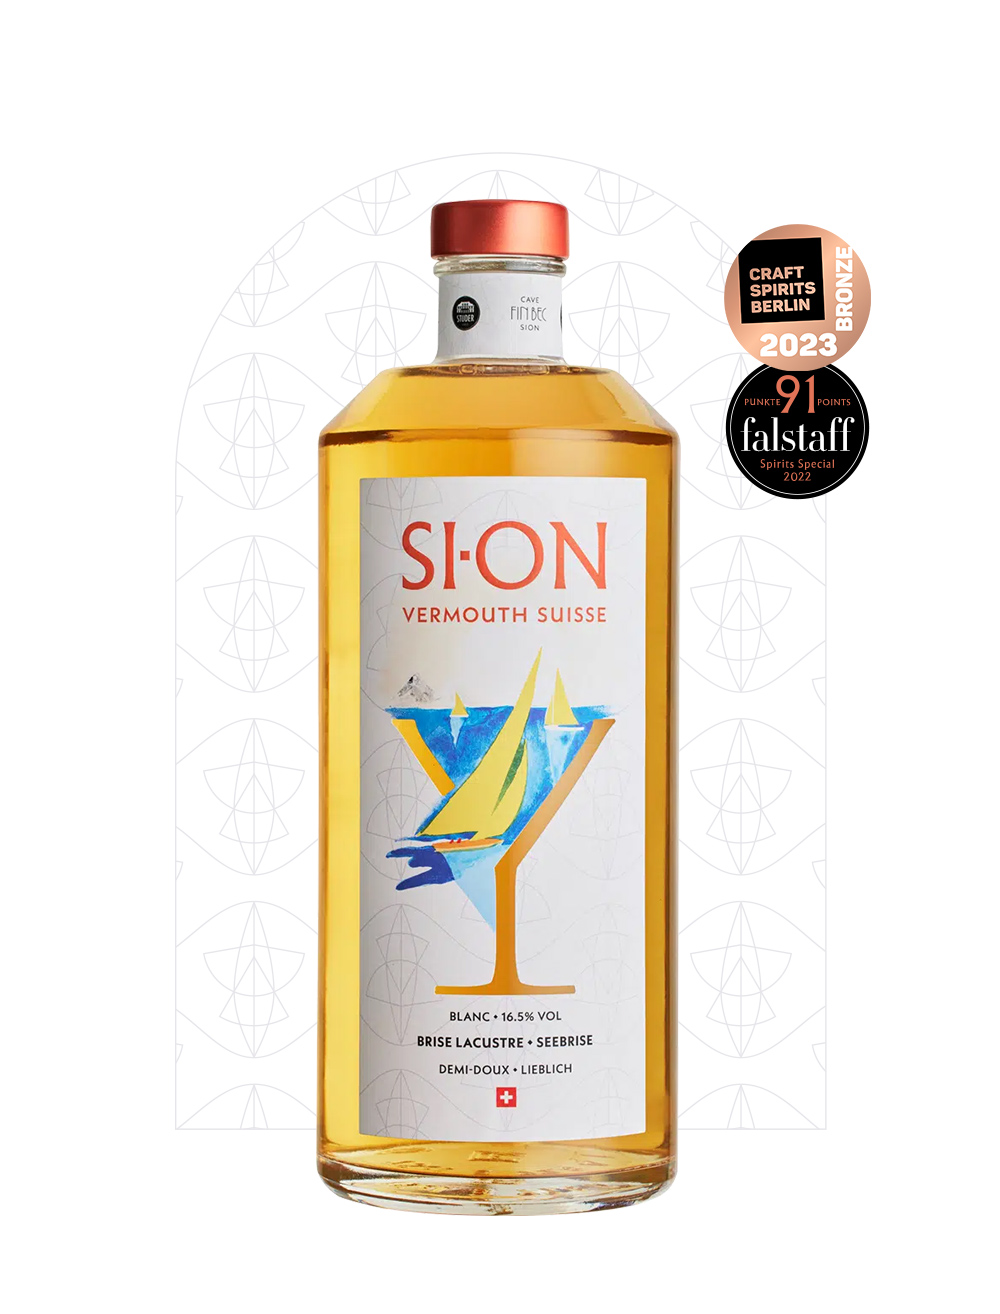 SI-ON Vermouth Suisse Seebrise - Wermut aus Sion